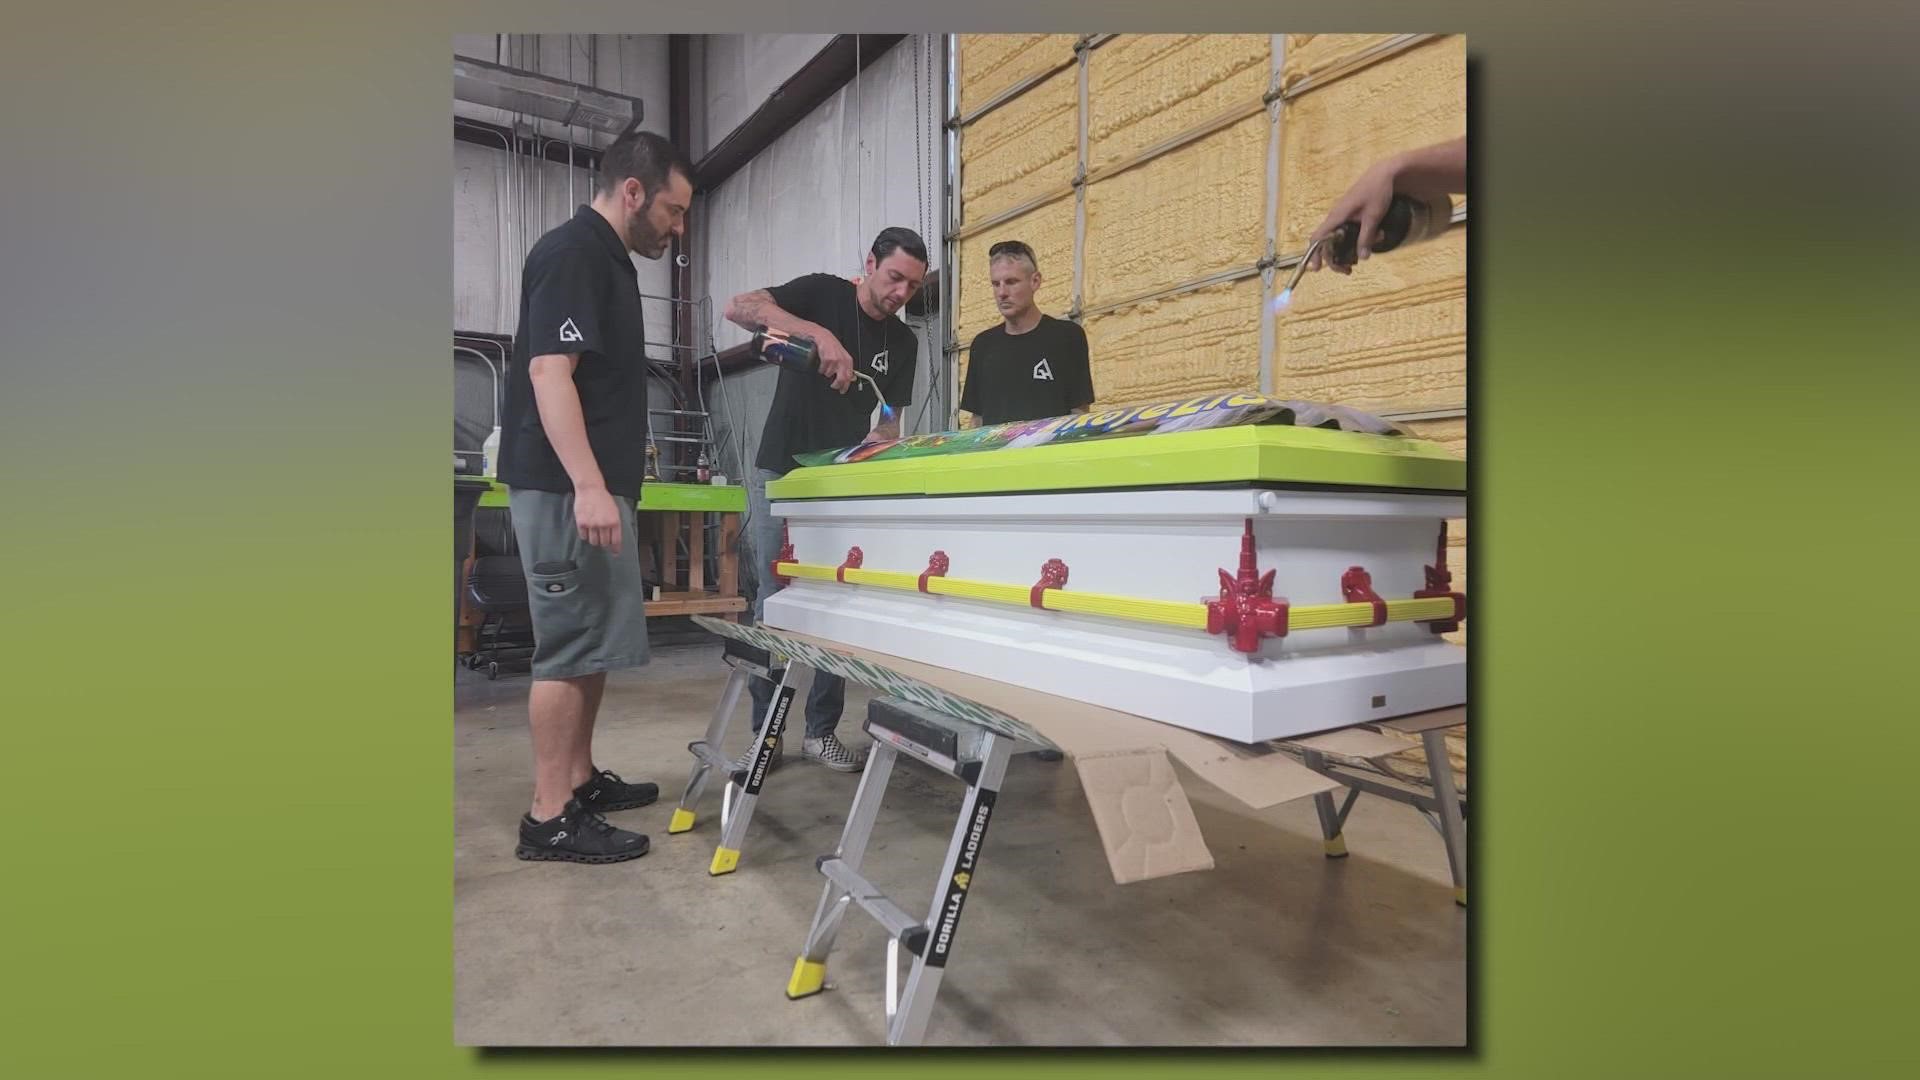 SoulShine Industries, a business out of Edna, Texas, in southeast Texas, has created caskets for the 19 child victims of the Uvalde school shooting last Tuesday.